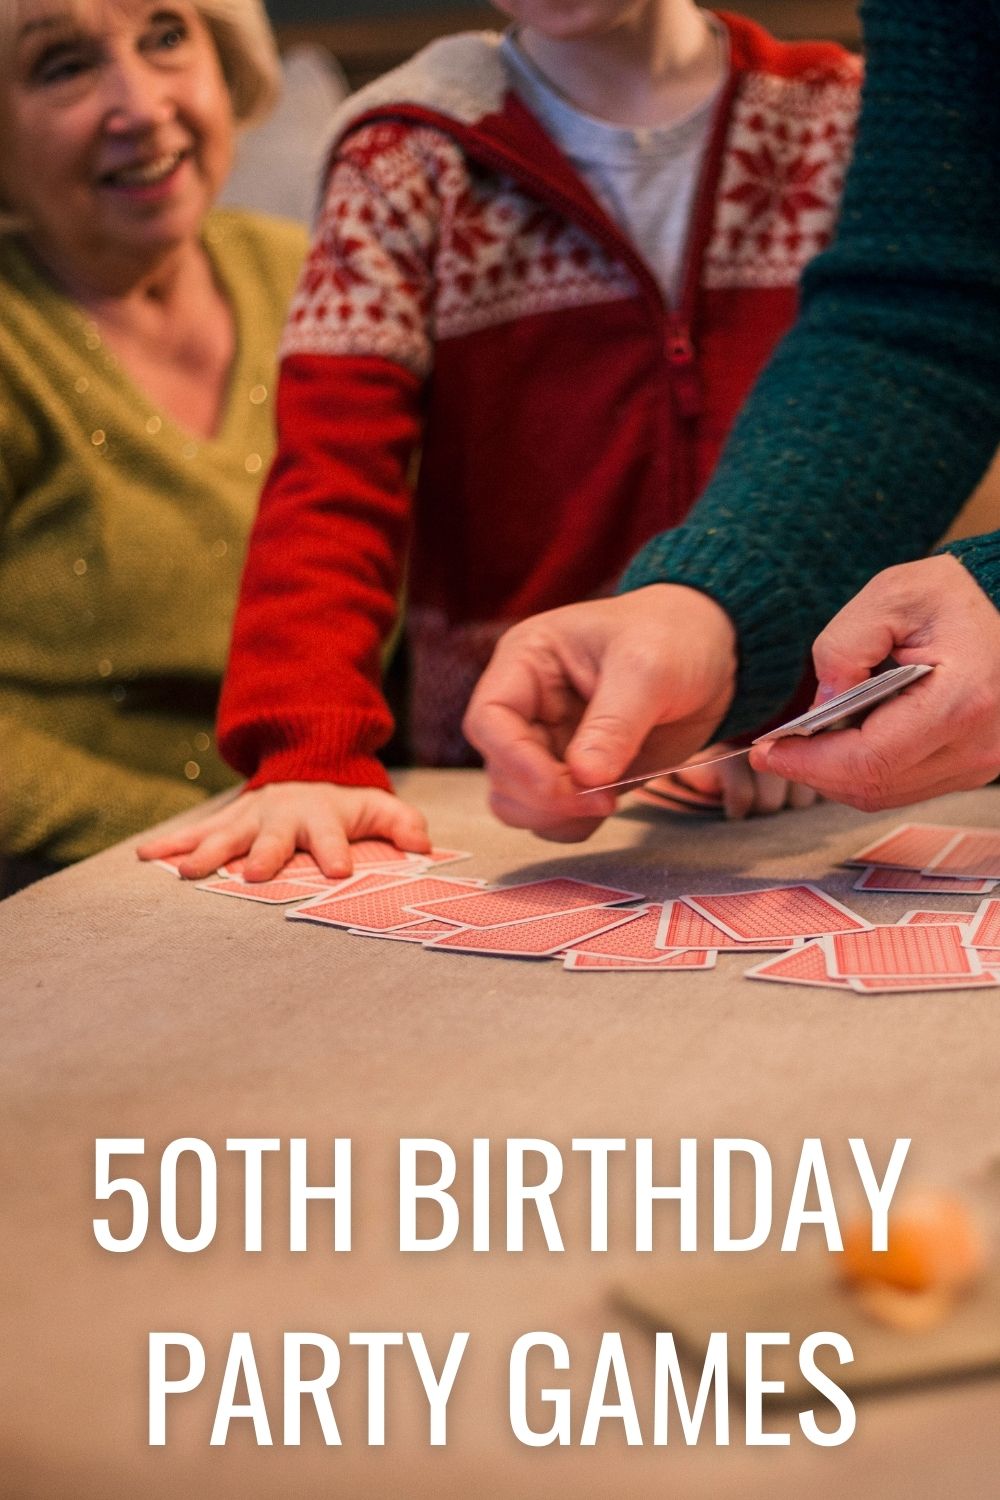 50th birthday party games